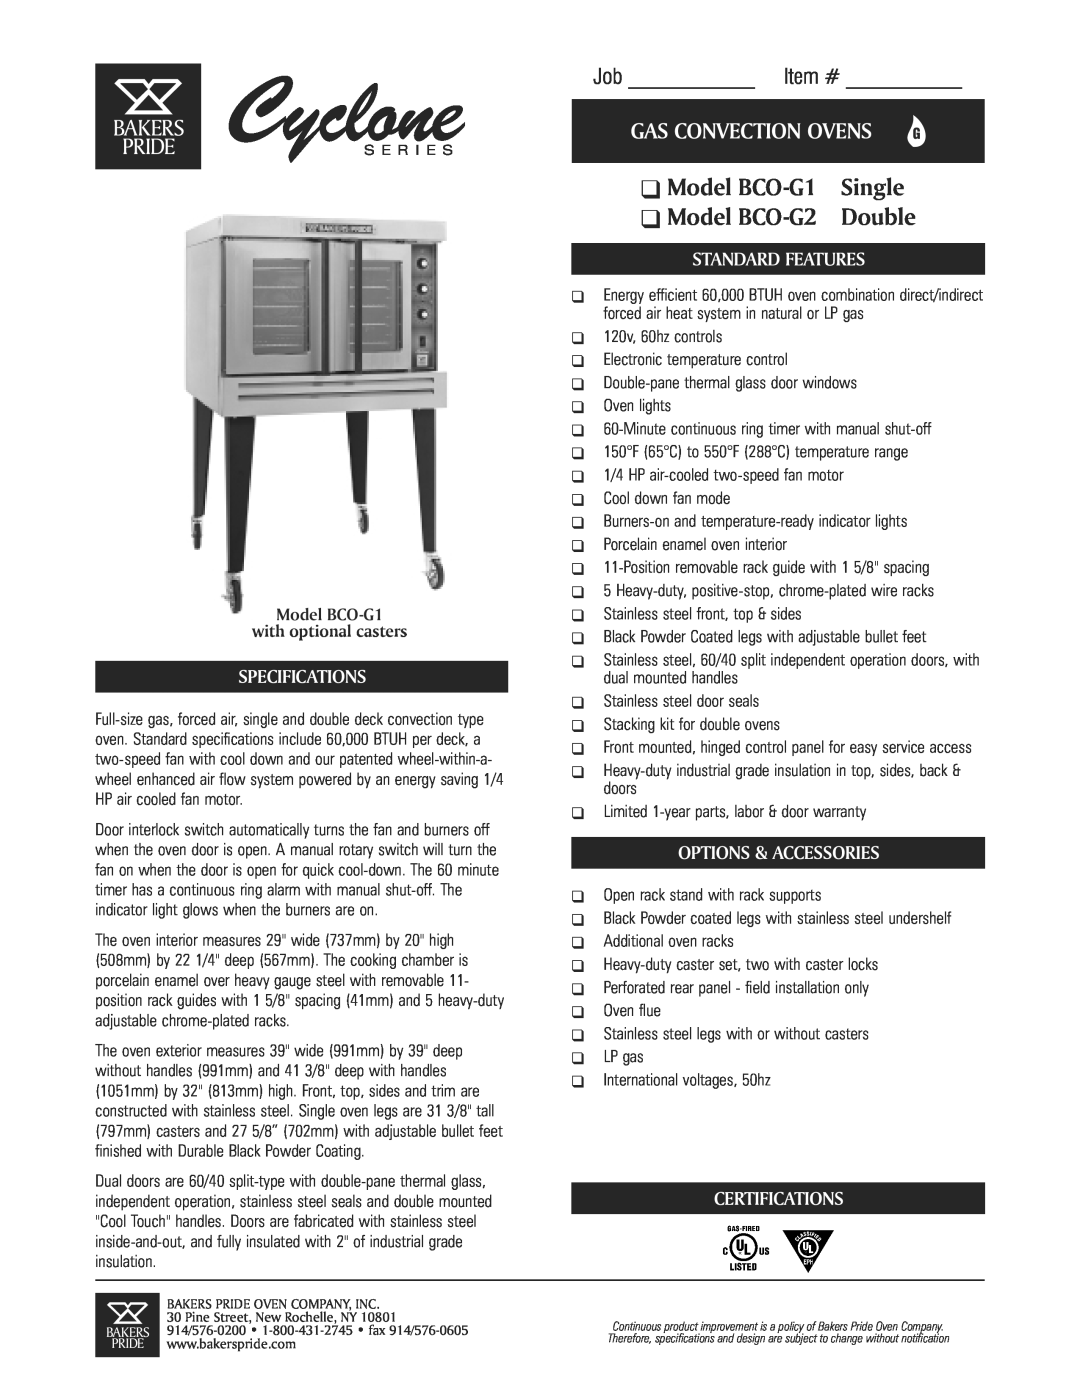 Bakers Pride Oven specifications Model BCO-G1 with optional casters, Model BCO-G1 Single Model BCO-G2 Double, Pride 